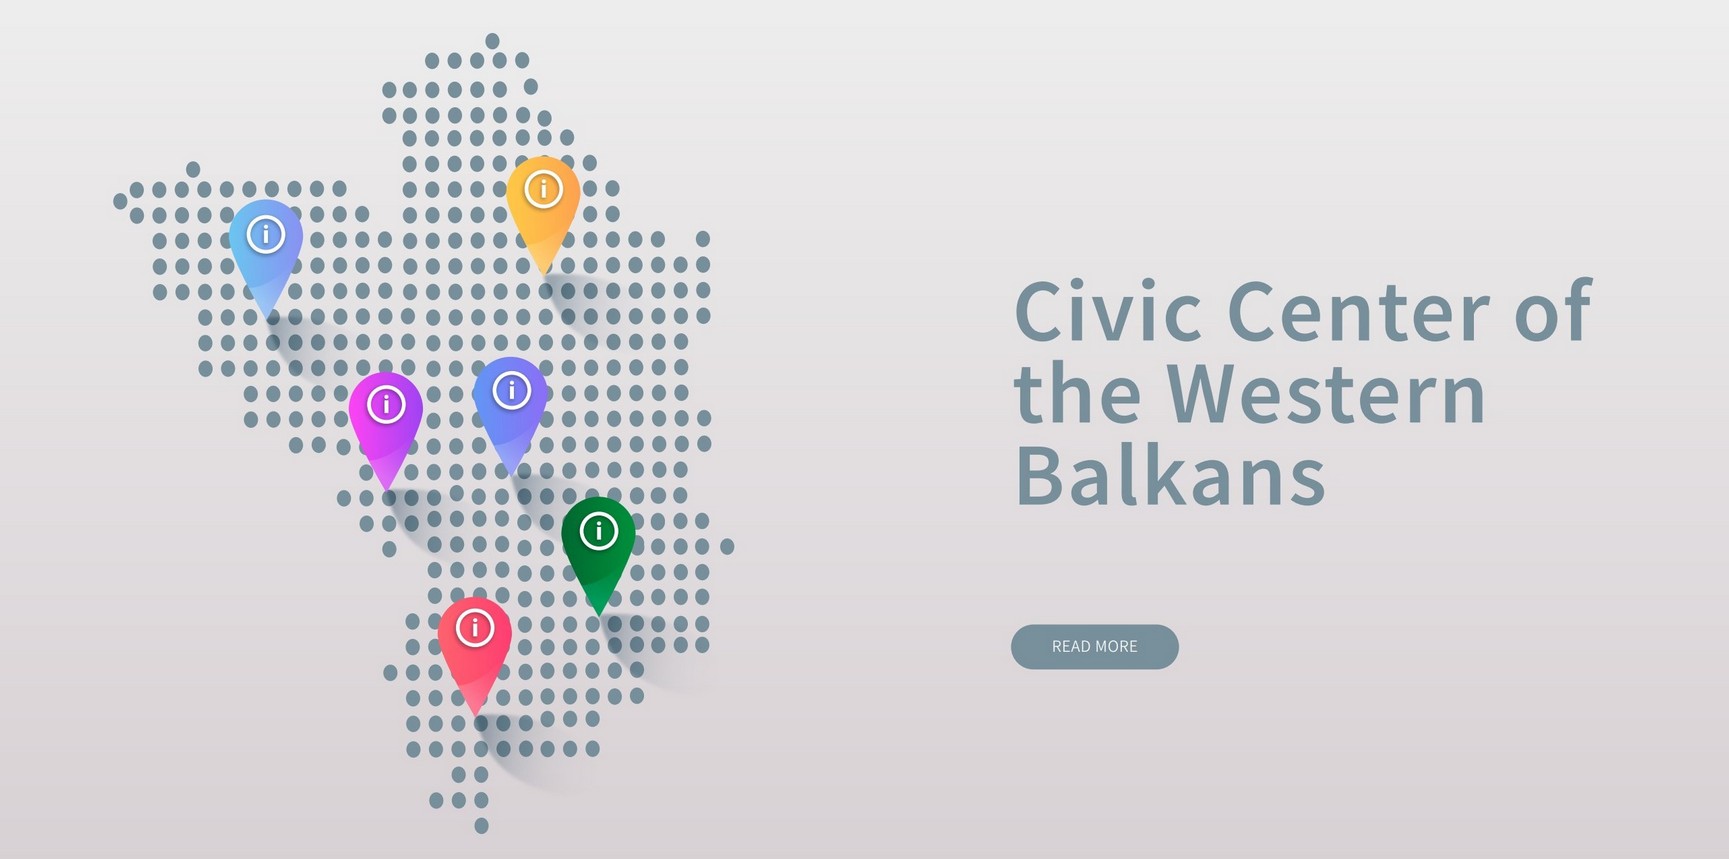 Digital Civic Center of the Western Balkans  has been launched!